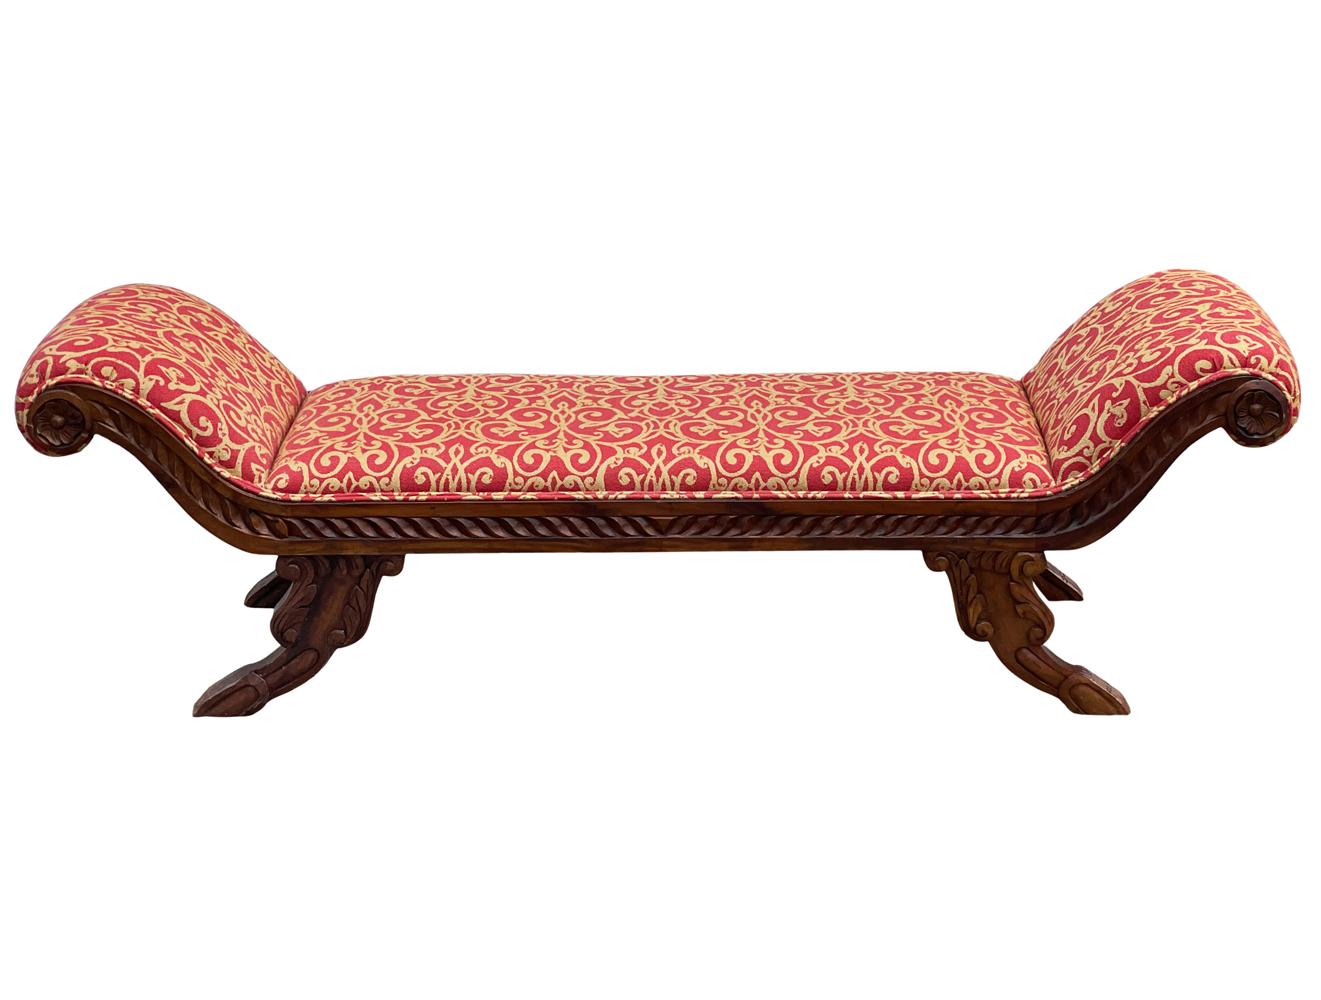 Long Vintage Italian Style Carved Wood Bench with Upholstered Seat  In Good Condition For Sale In Philadelphia, PA